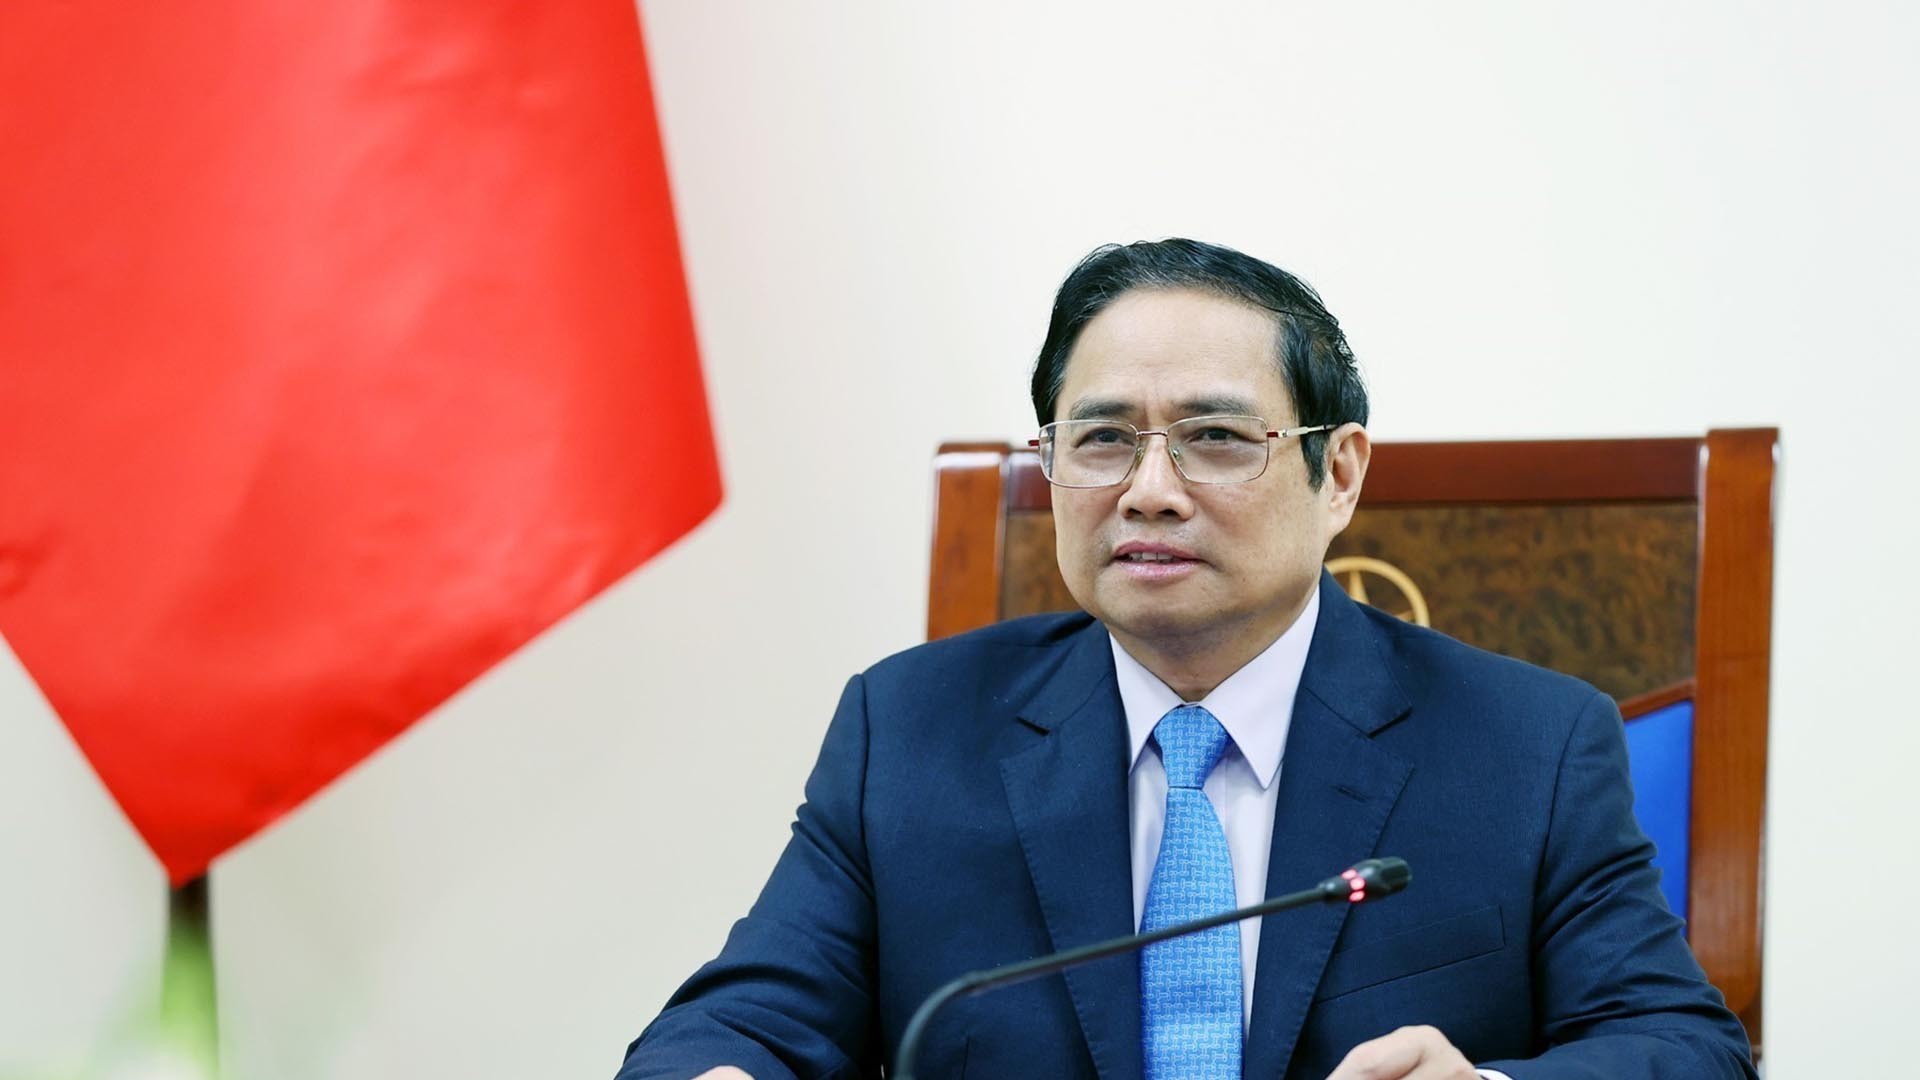 PM Pham Minh Chinh to visit US, attend ASEAN-US Special Summit